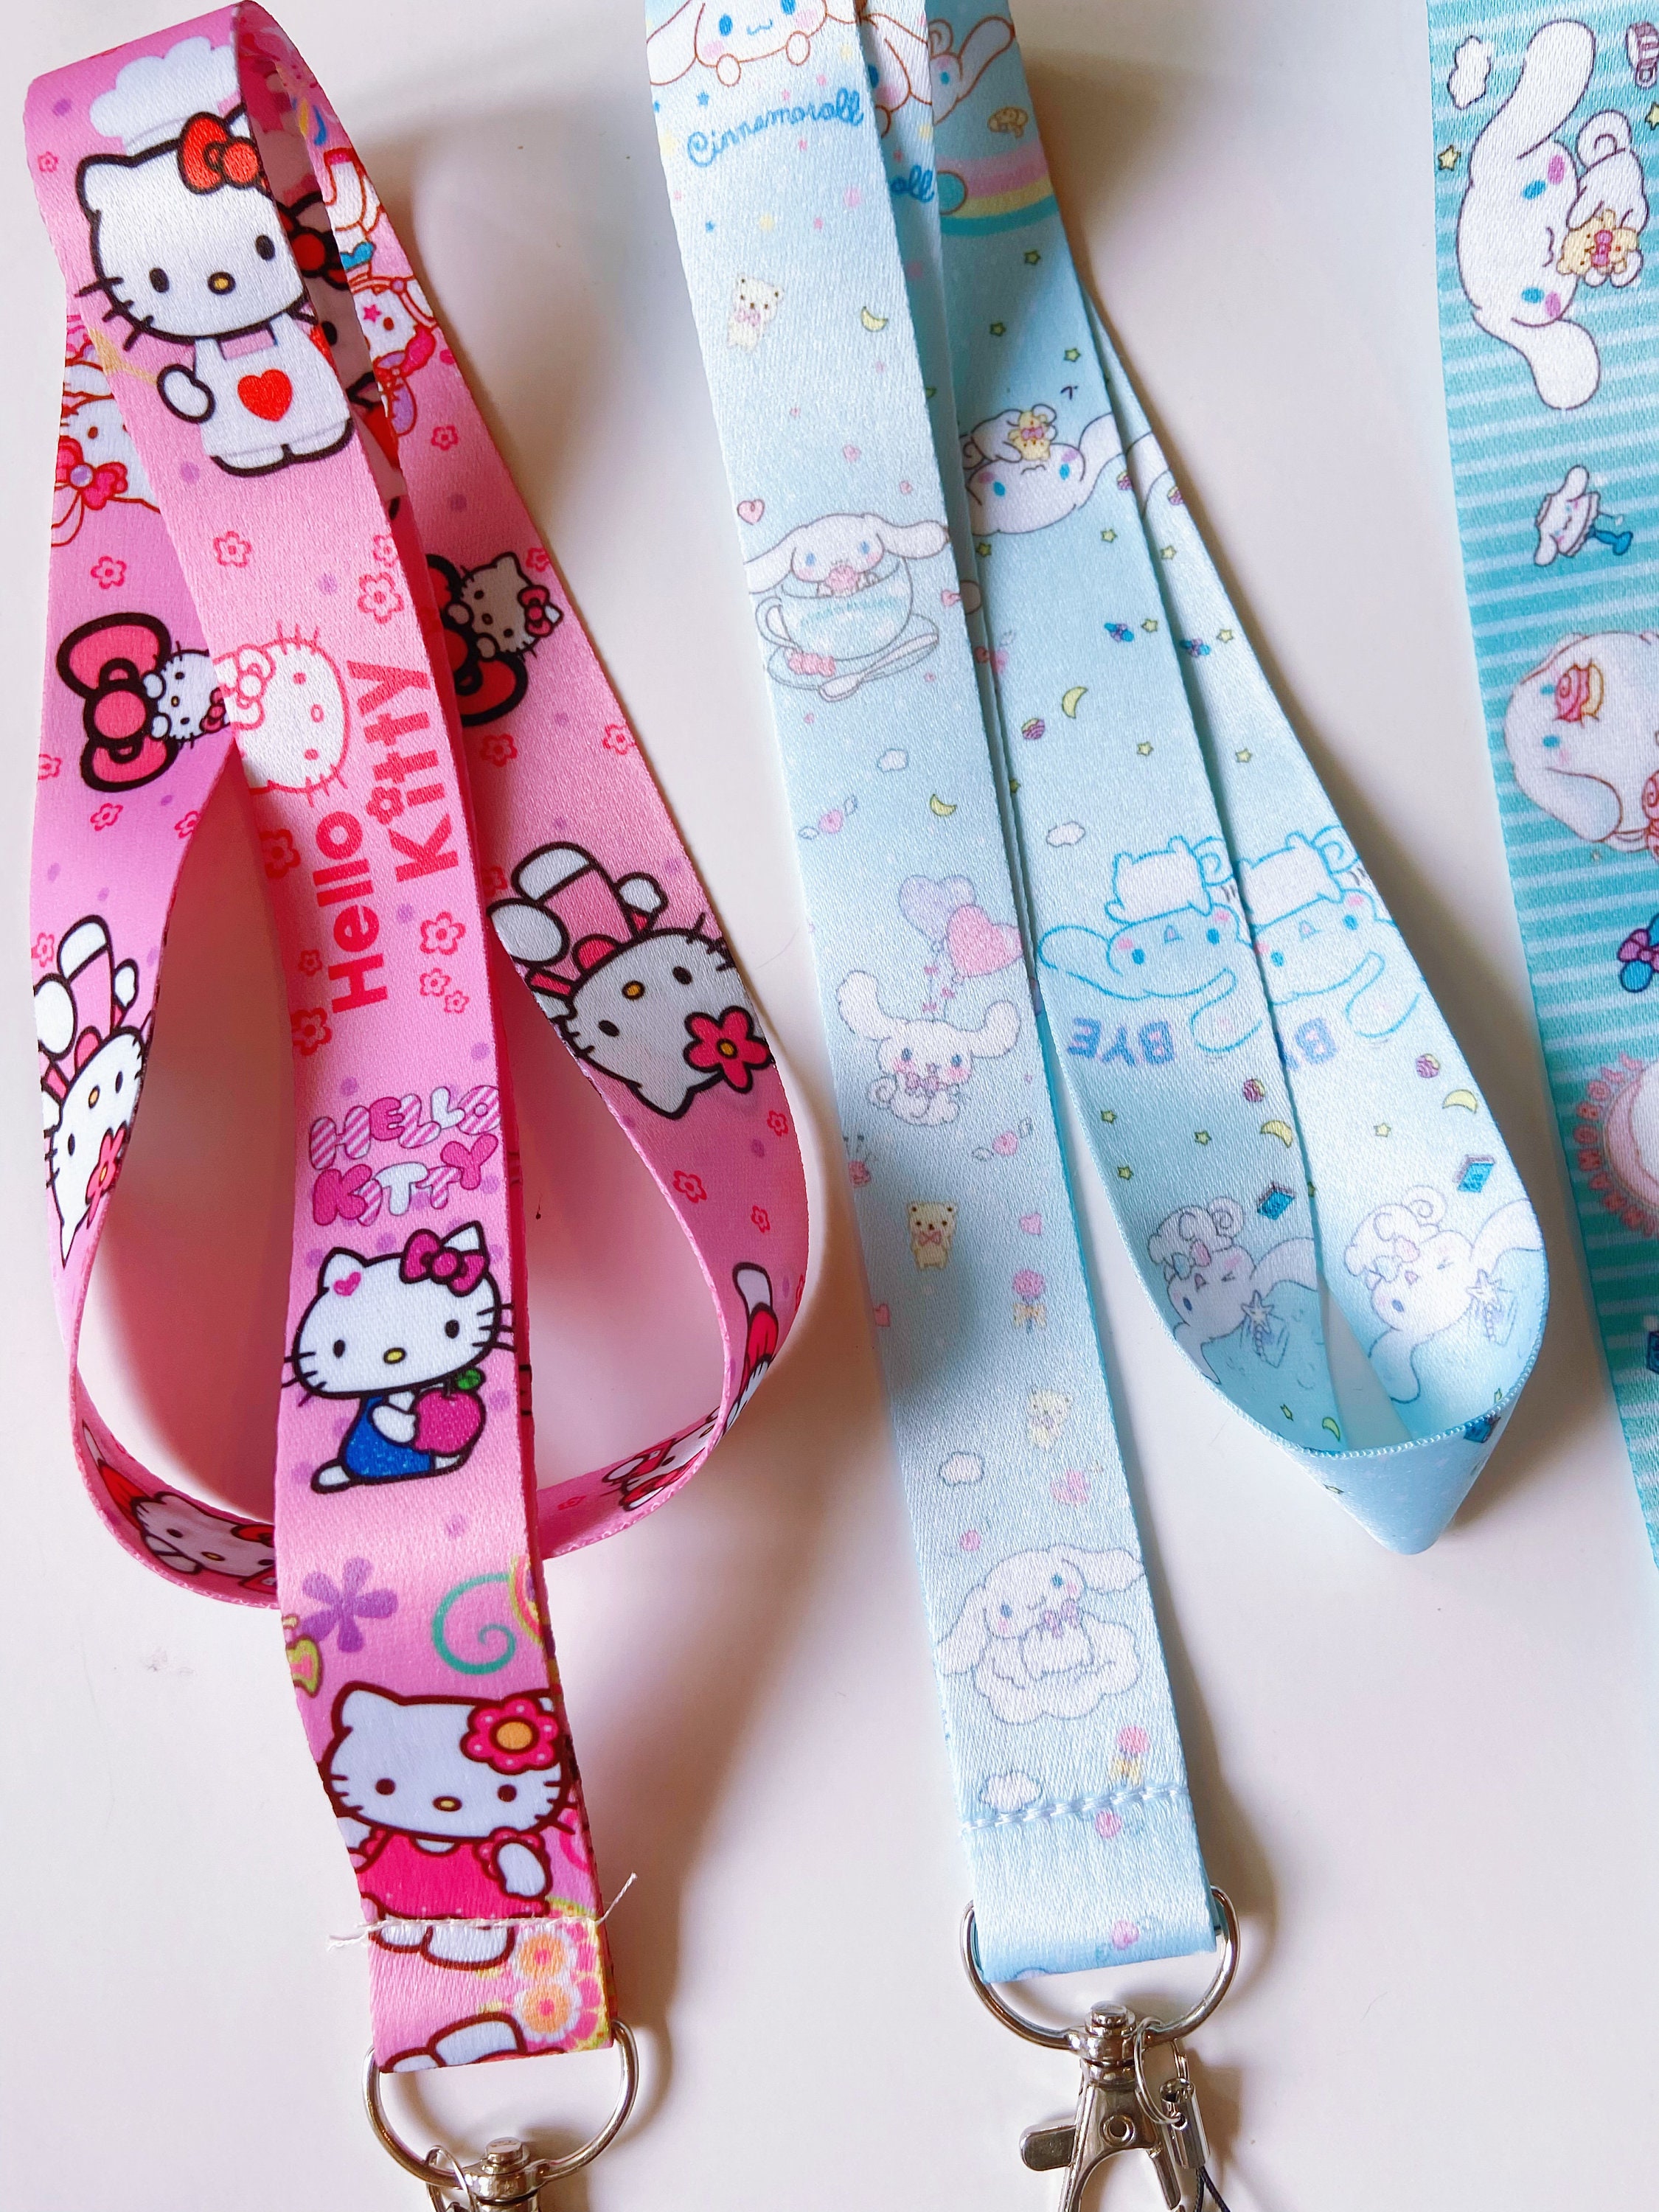 Poch-acco Lanyard with ID Holder,Cute Lanyards for ID Badges for Women and Man,Badge Holder Lanyard for Keys,Kawaii Lanyard,Anime Lanyard,Blue